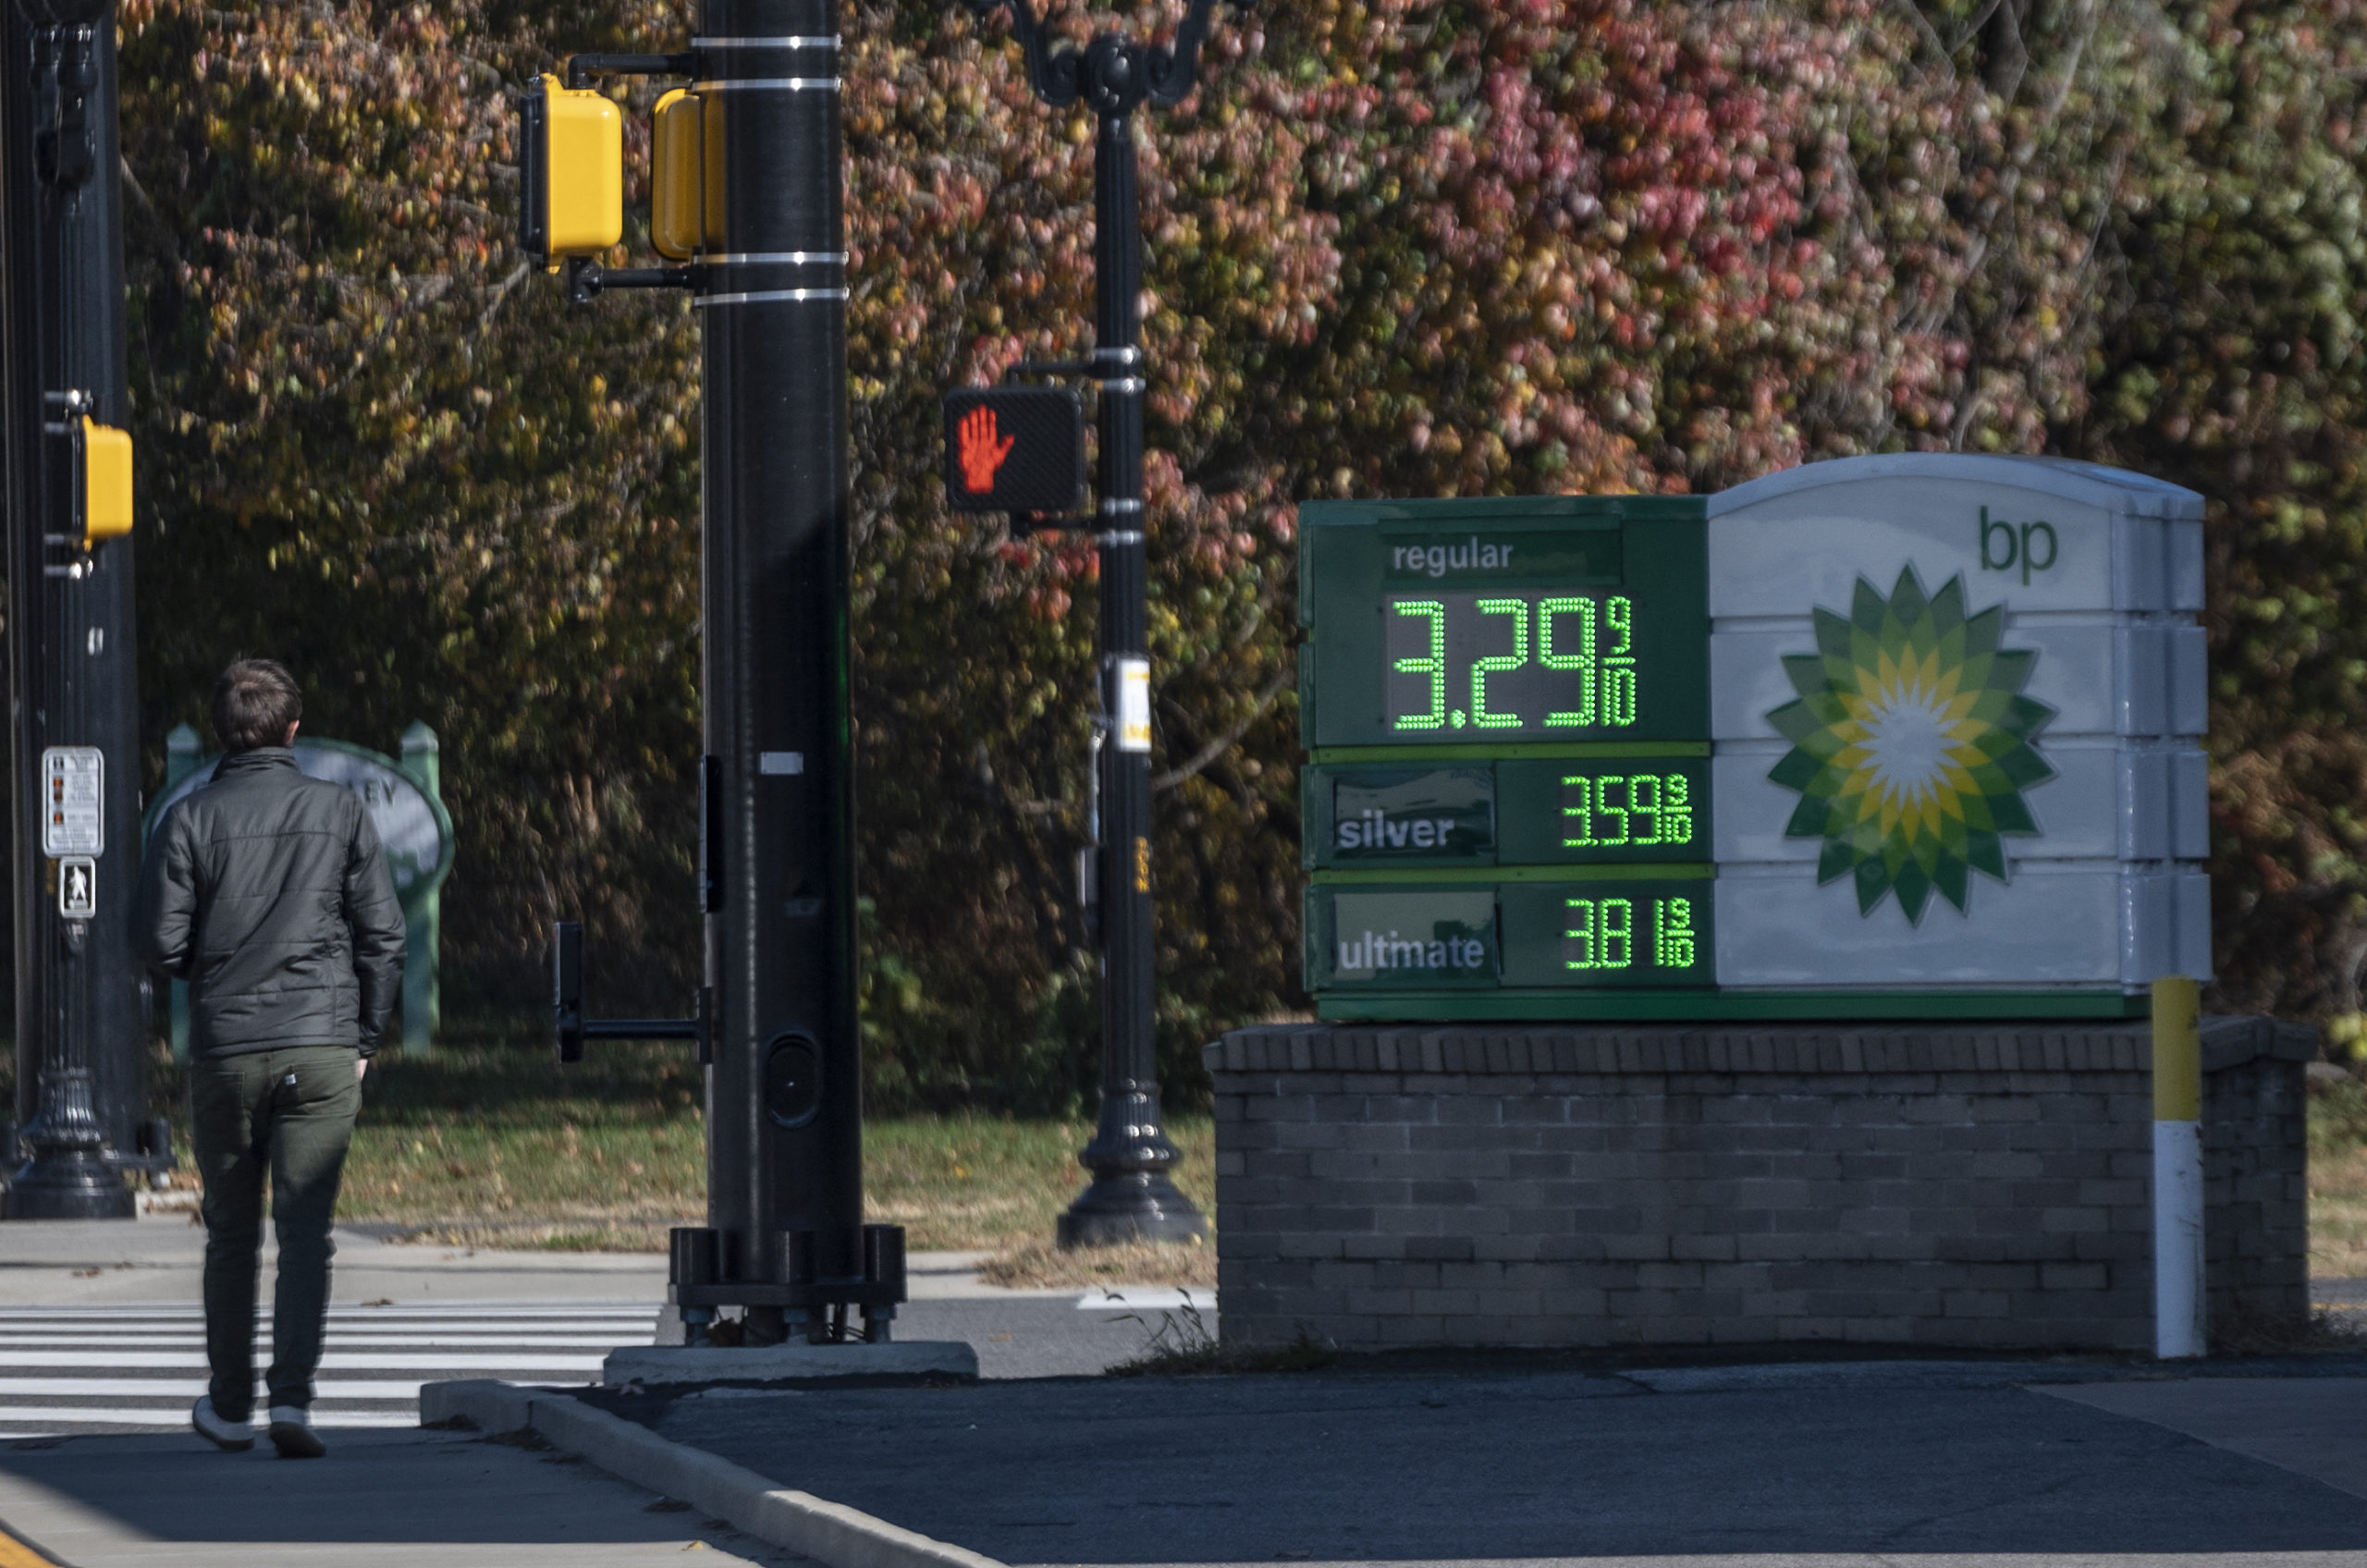 A man walks past a price board at a BP gas station in Arlington, Virginia on Nov. 23. (Andrew Caballero-Reynolds/AFP via Getty Images)